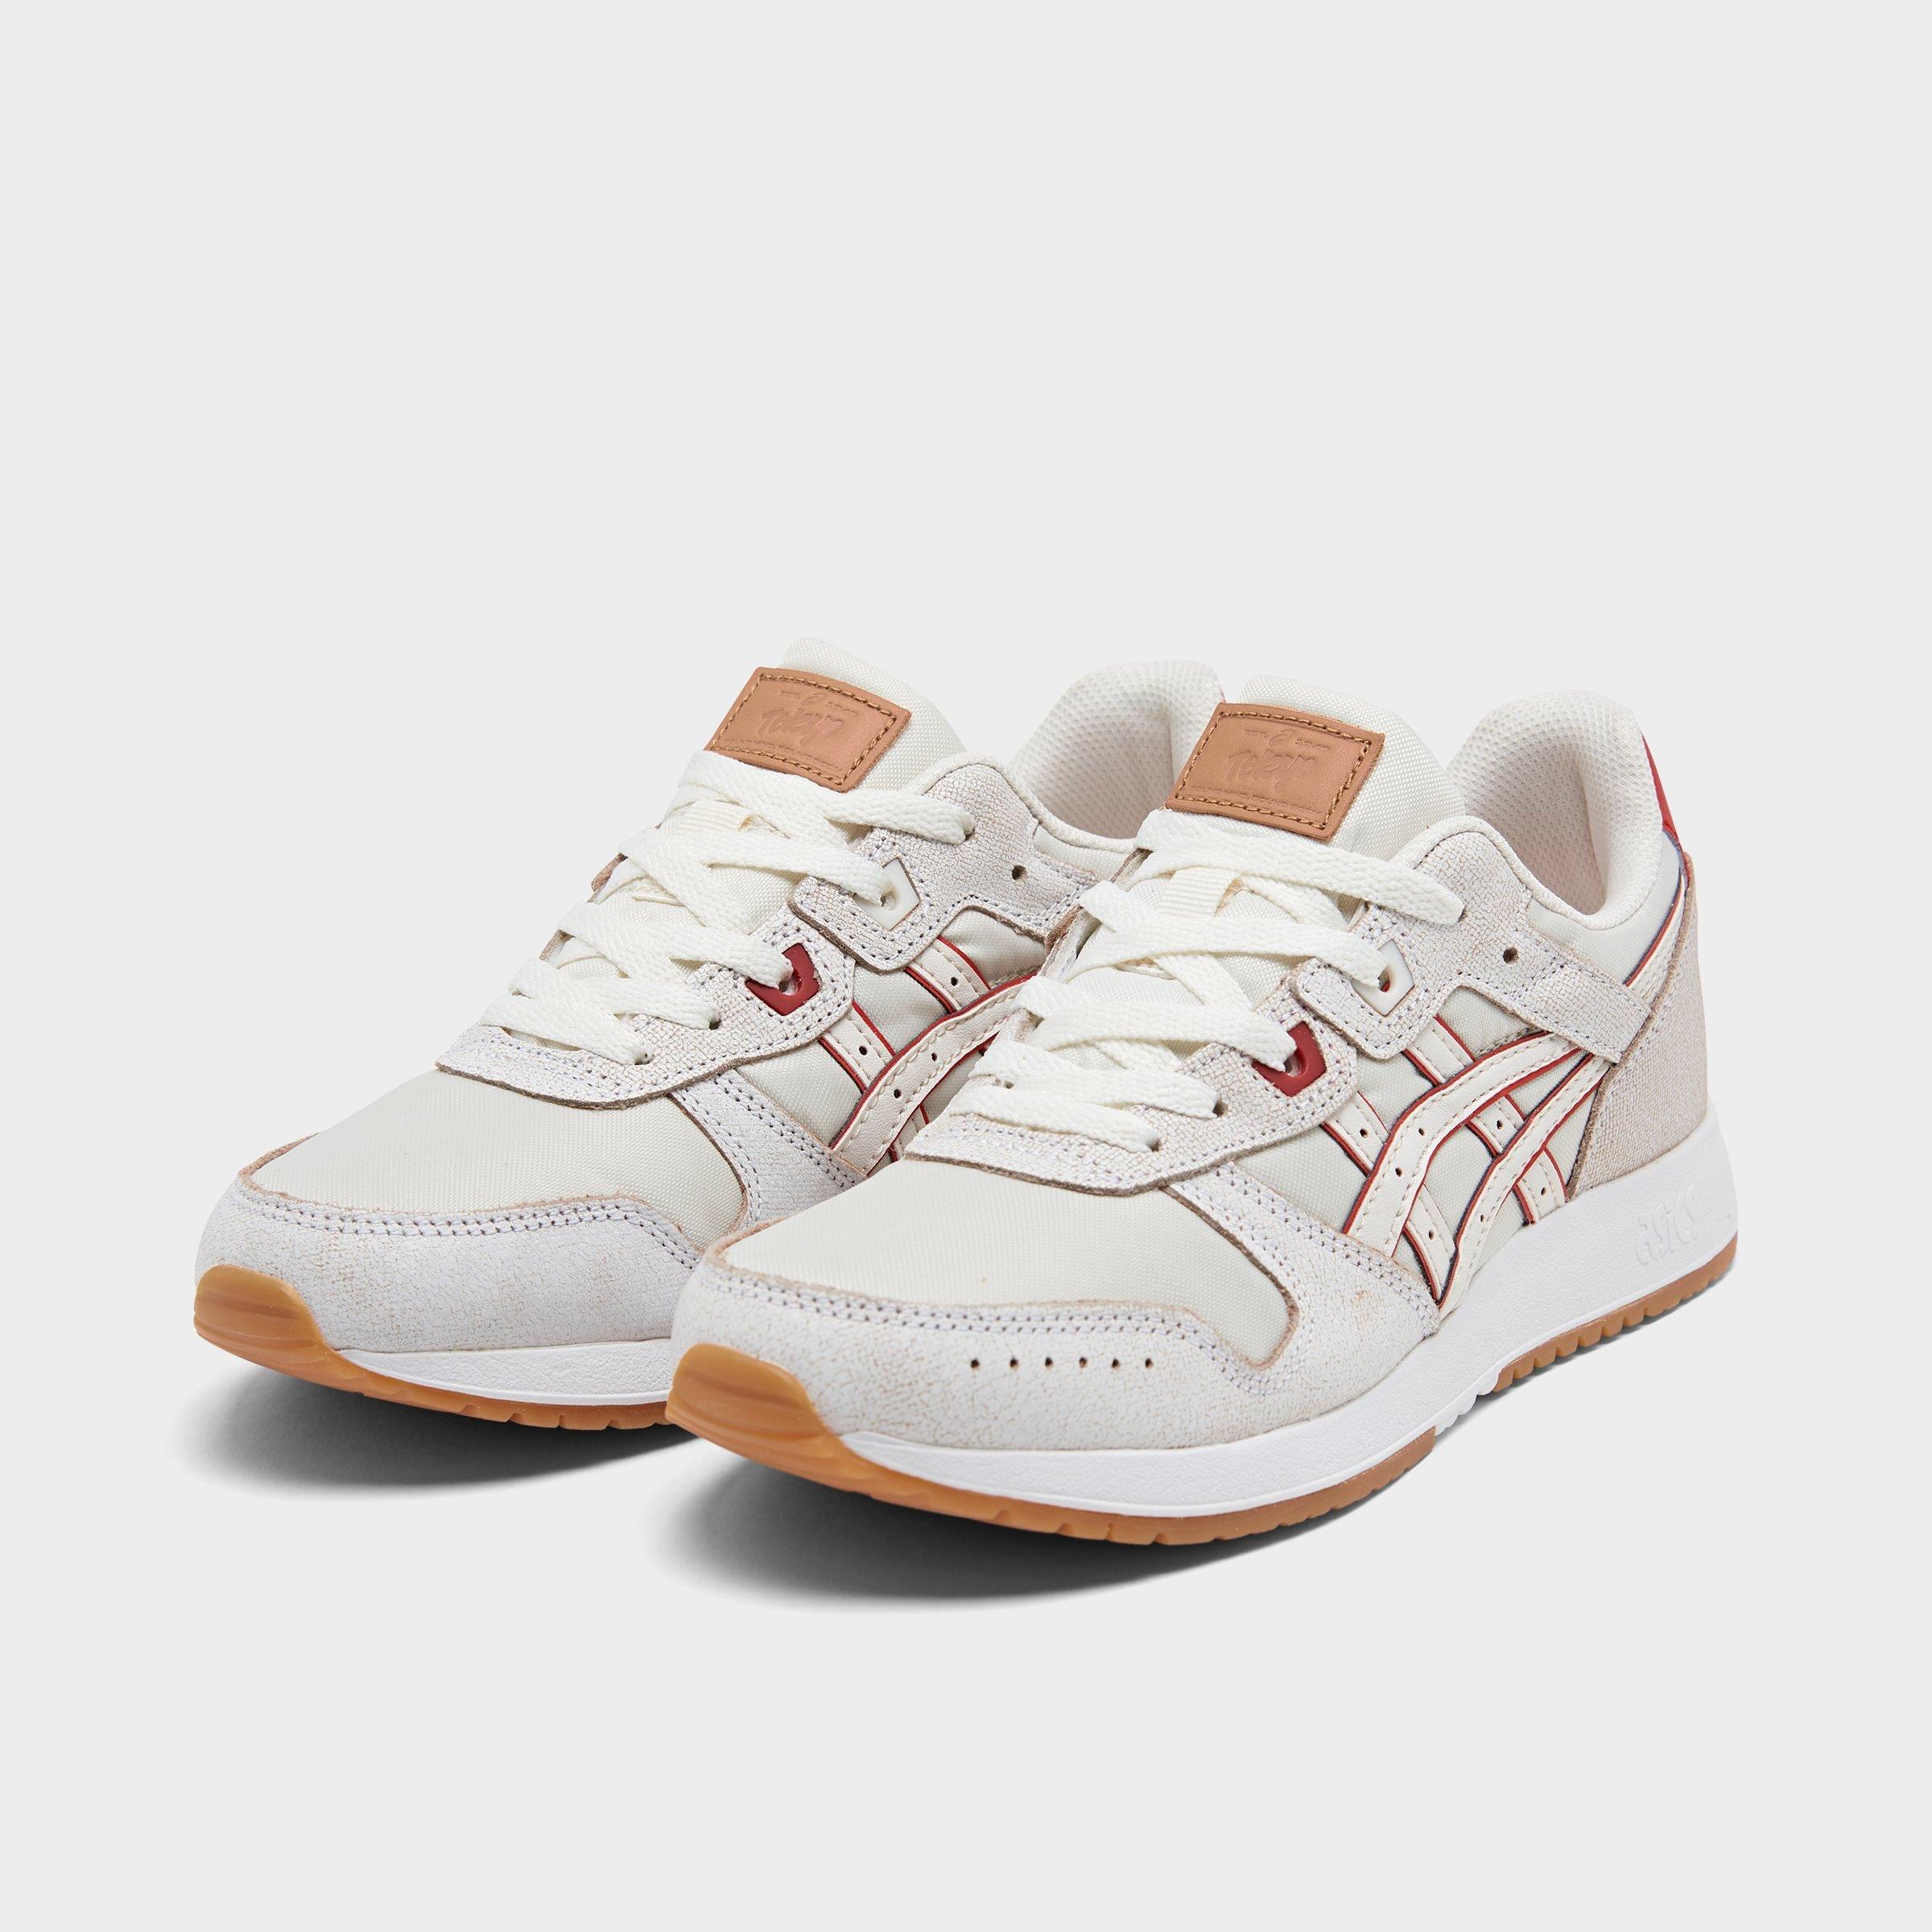 asics casual shoes womens